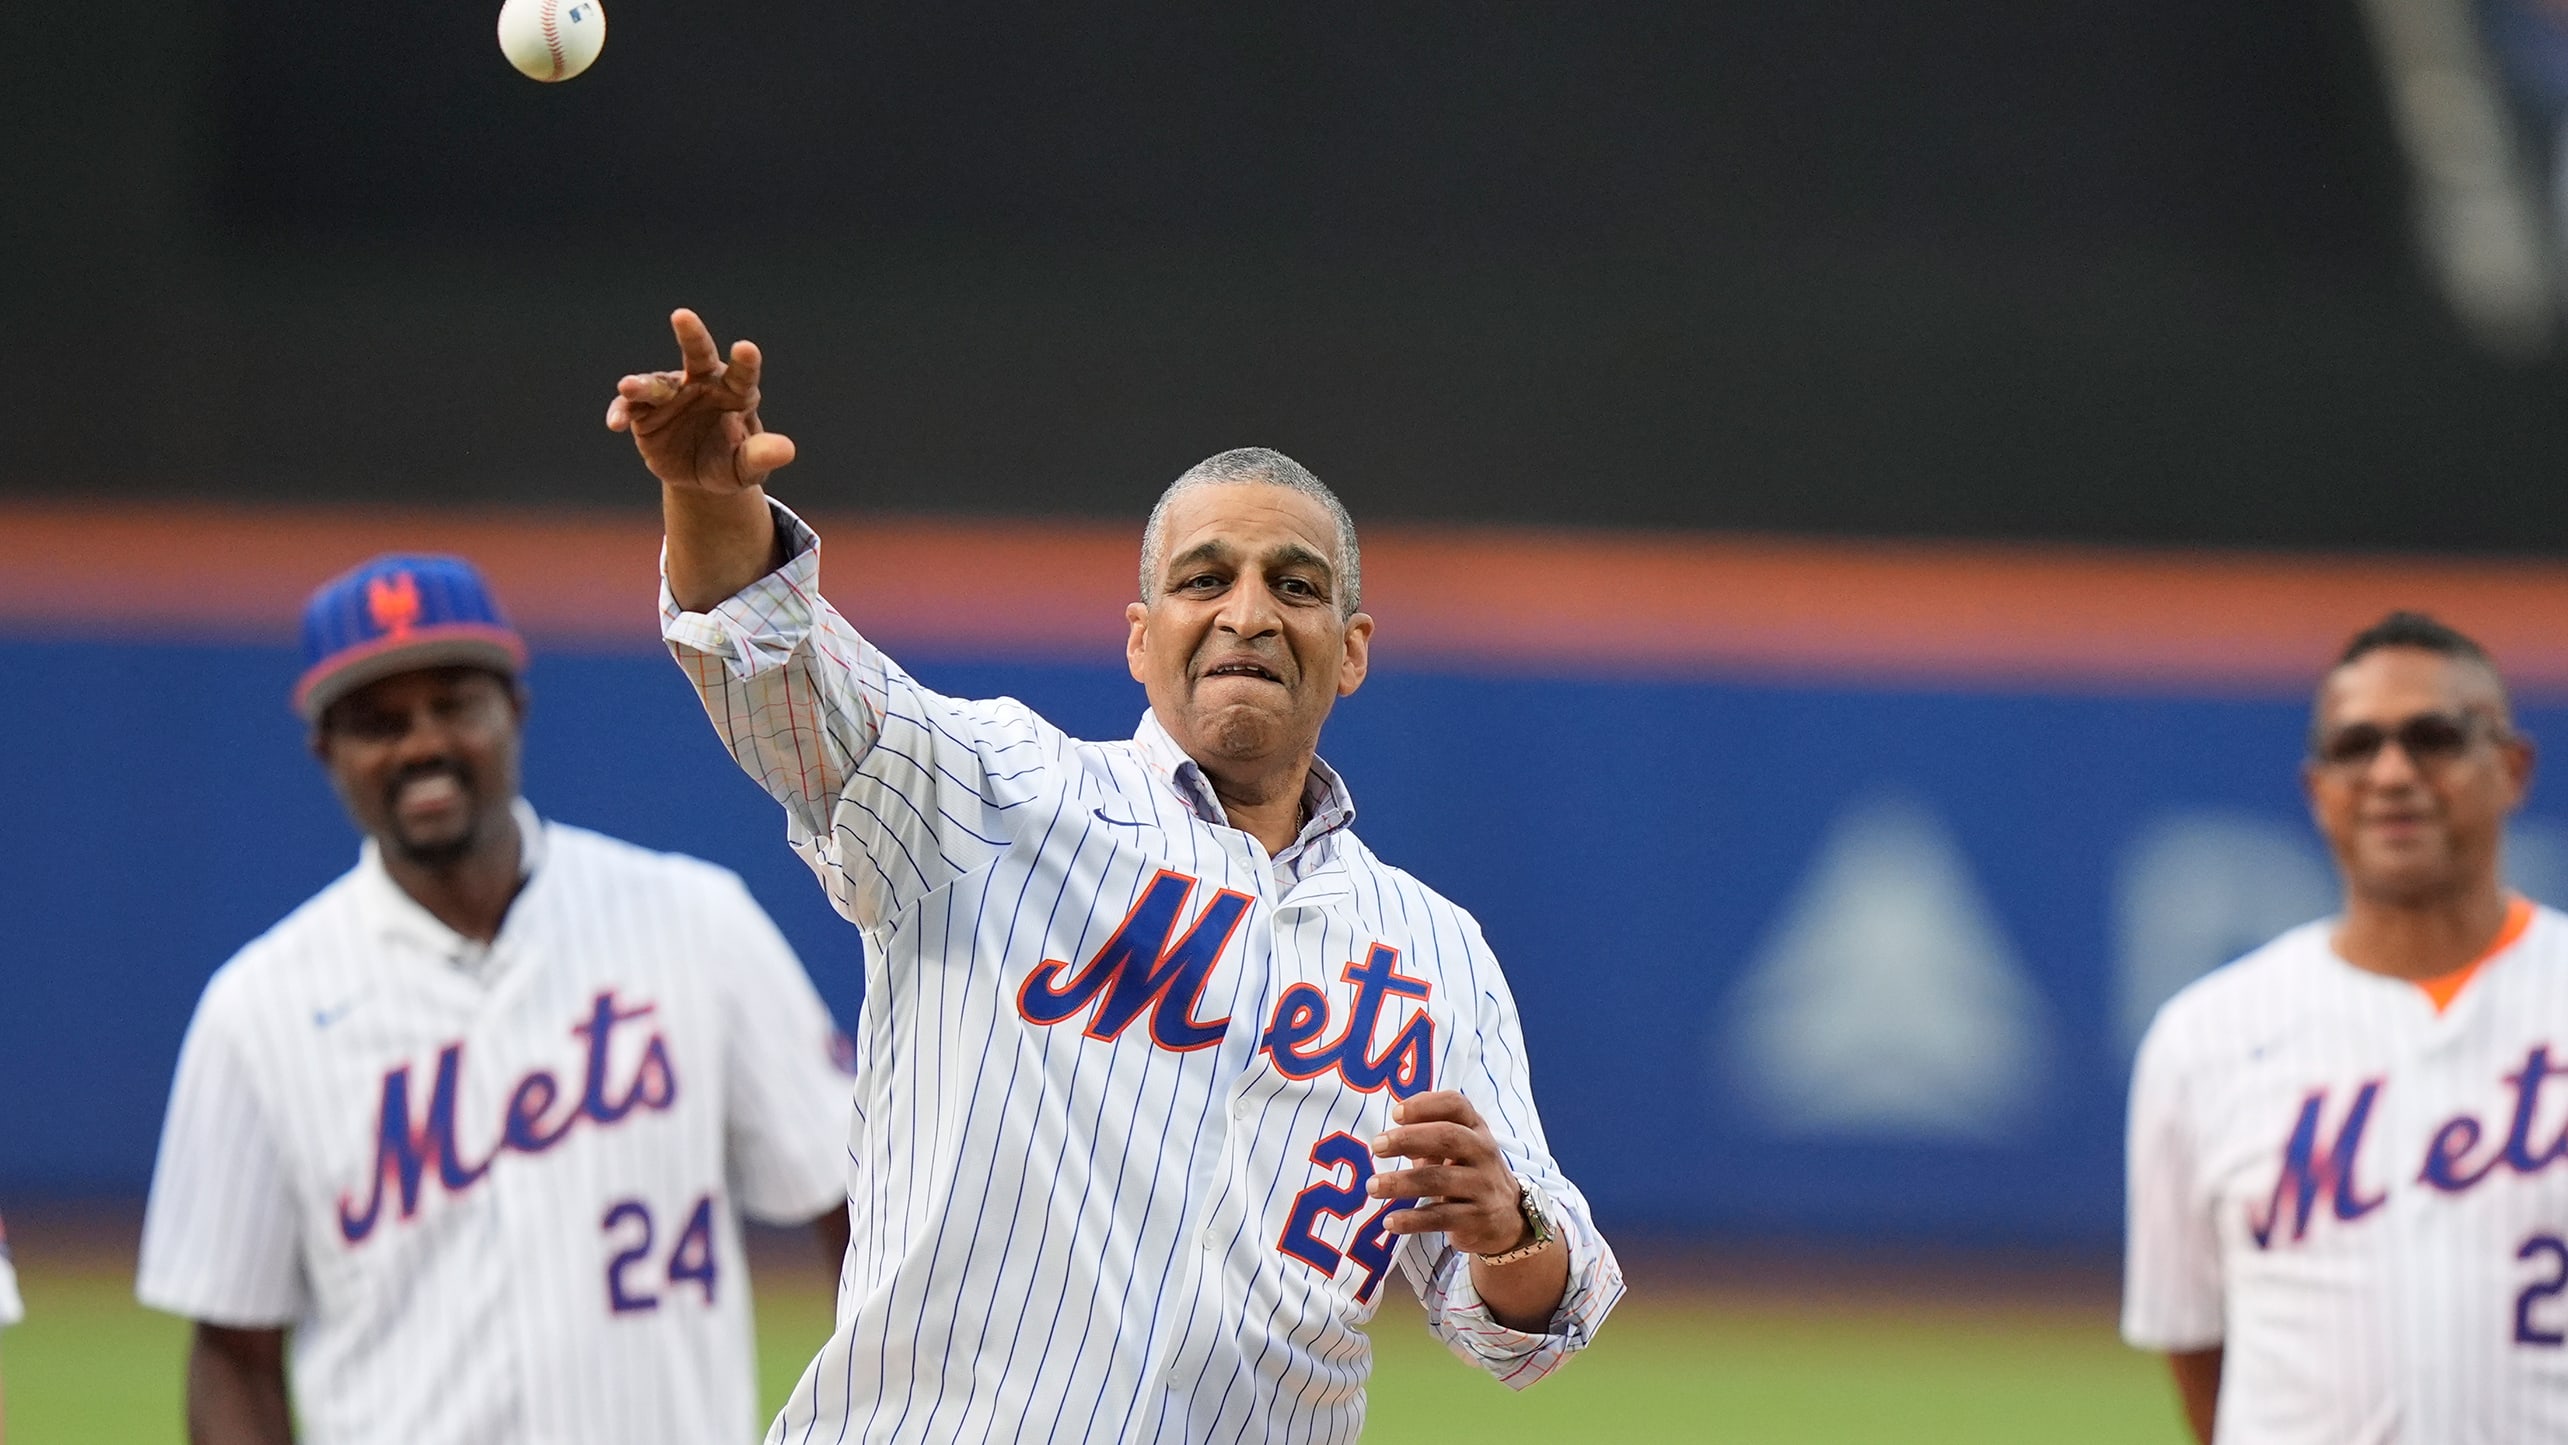 Willie Mays' son, Michael, delivers a first pitch before the Mets played the Yankees